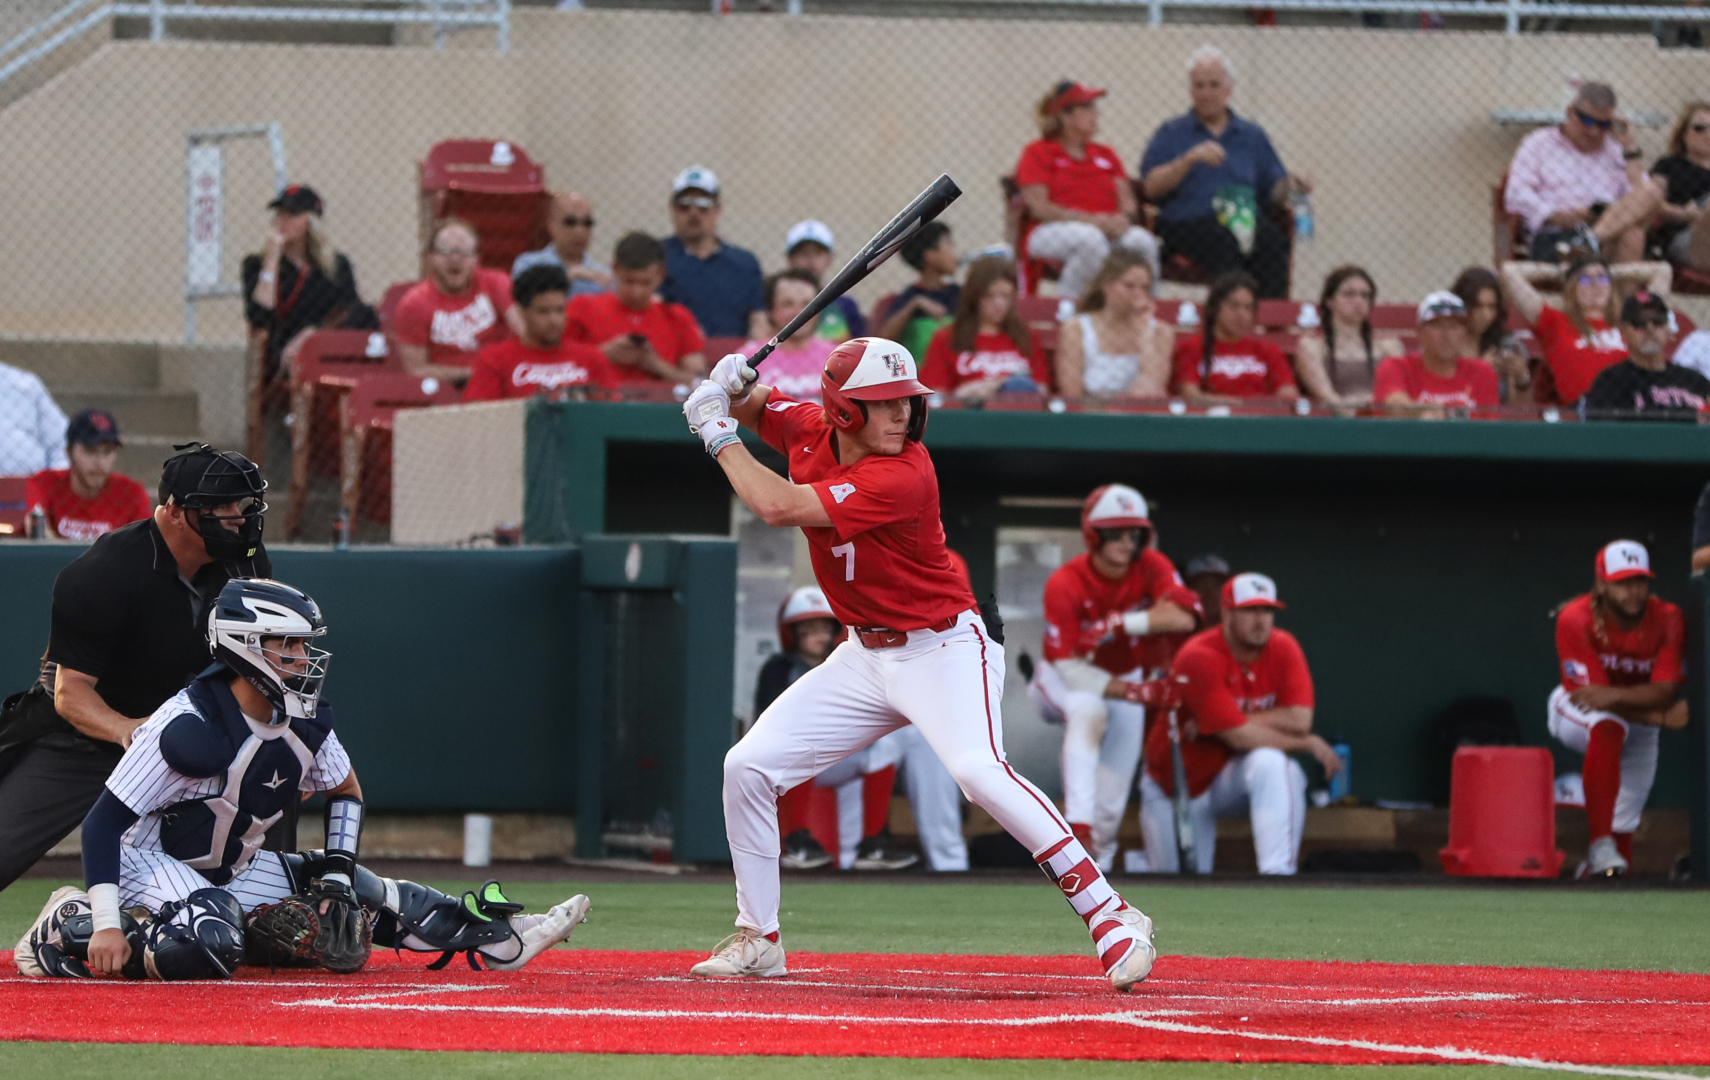 Third baseman Zach Arnold drove in two of UH baseball's four runs in the Cougars loss to Rice on Tuesday night. | Sean Thomas/The Cougar